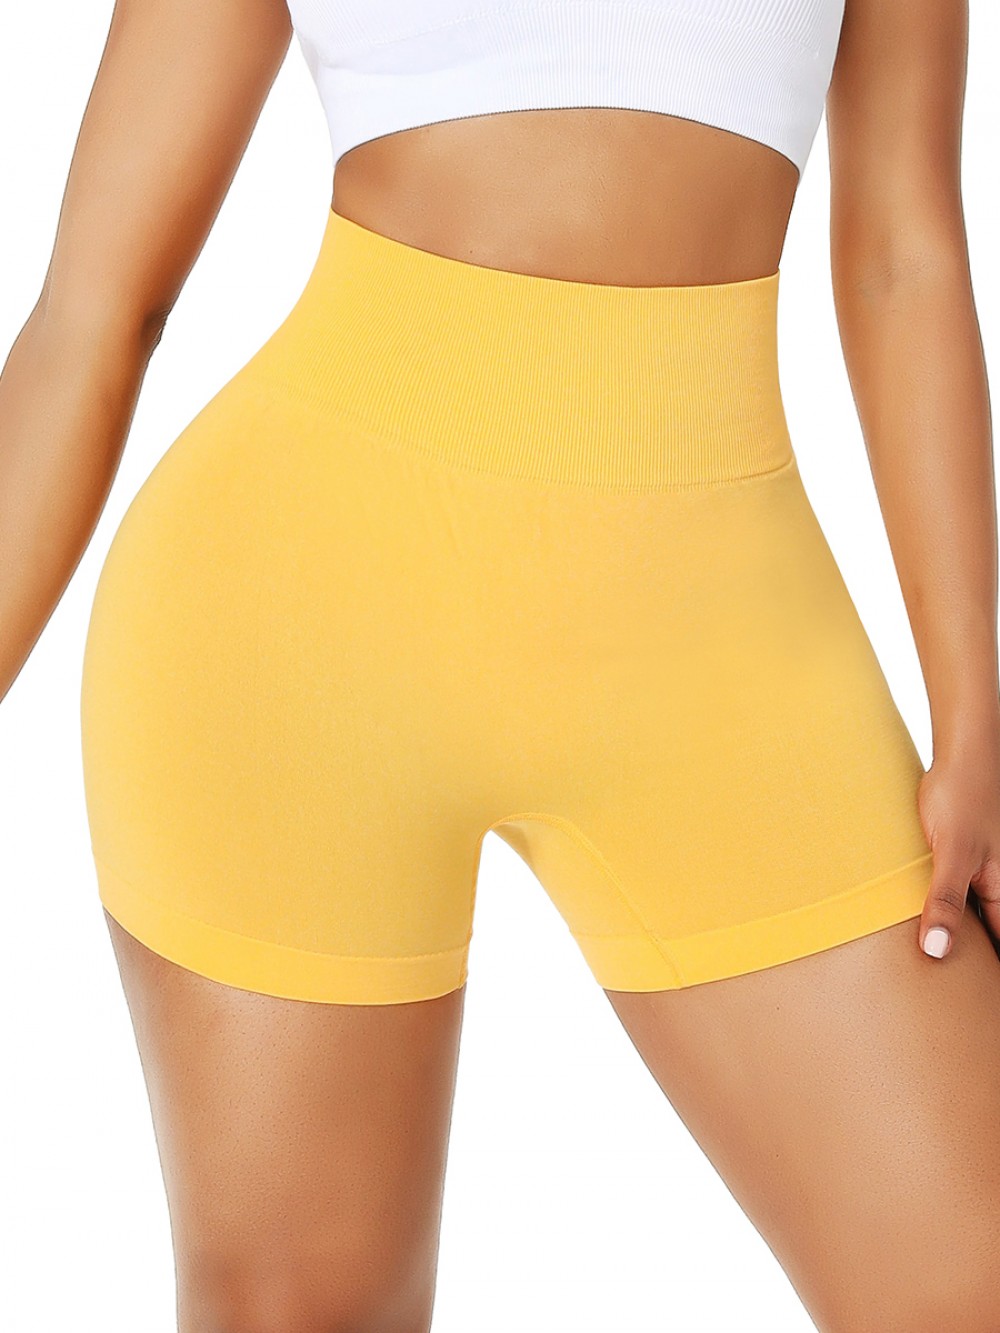 Fitted Yellow Thigh Length Seamless Athletic Shorts Fashionable Design